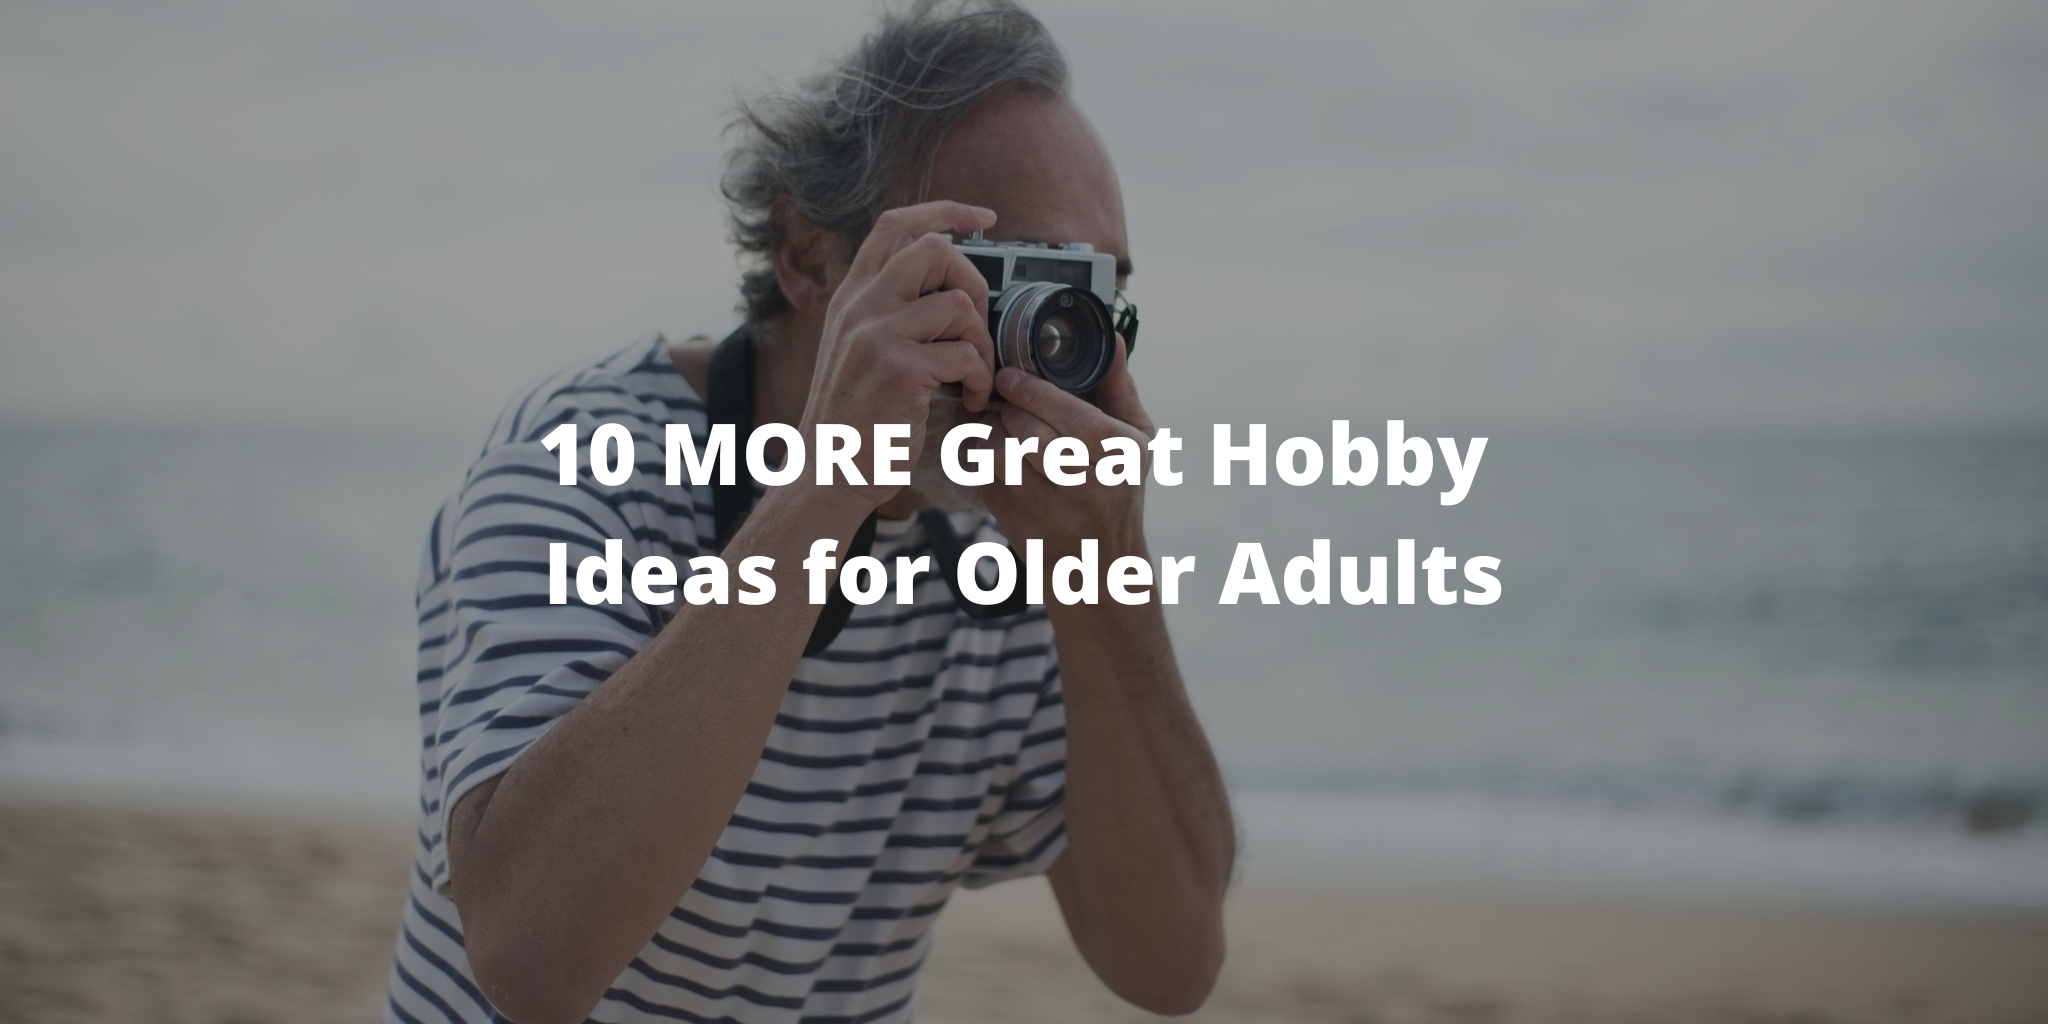 10 MORE Great Hobby Ideas for Older Adults